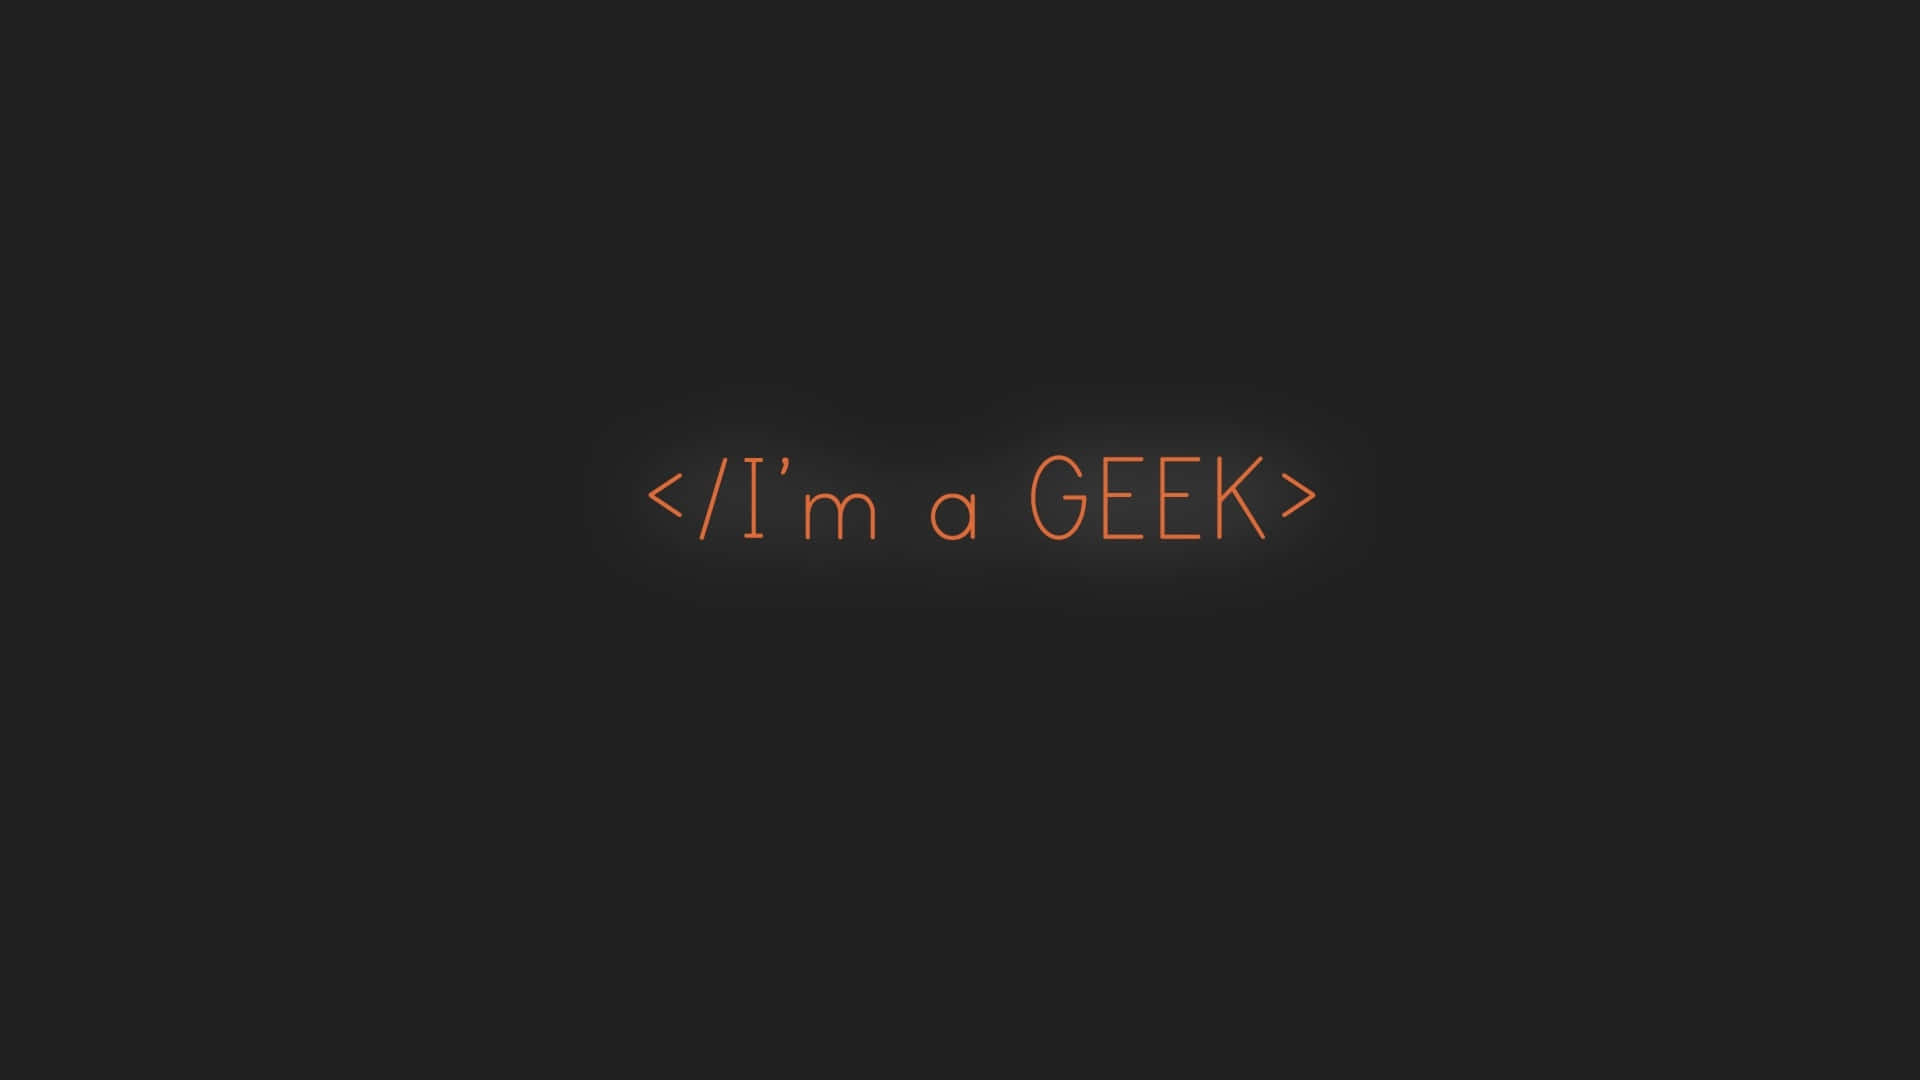 "Simplicity Starts with a Geek" Wallpaper